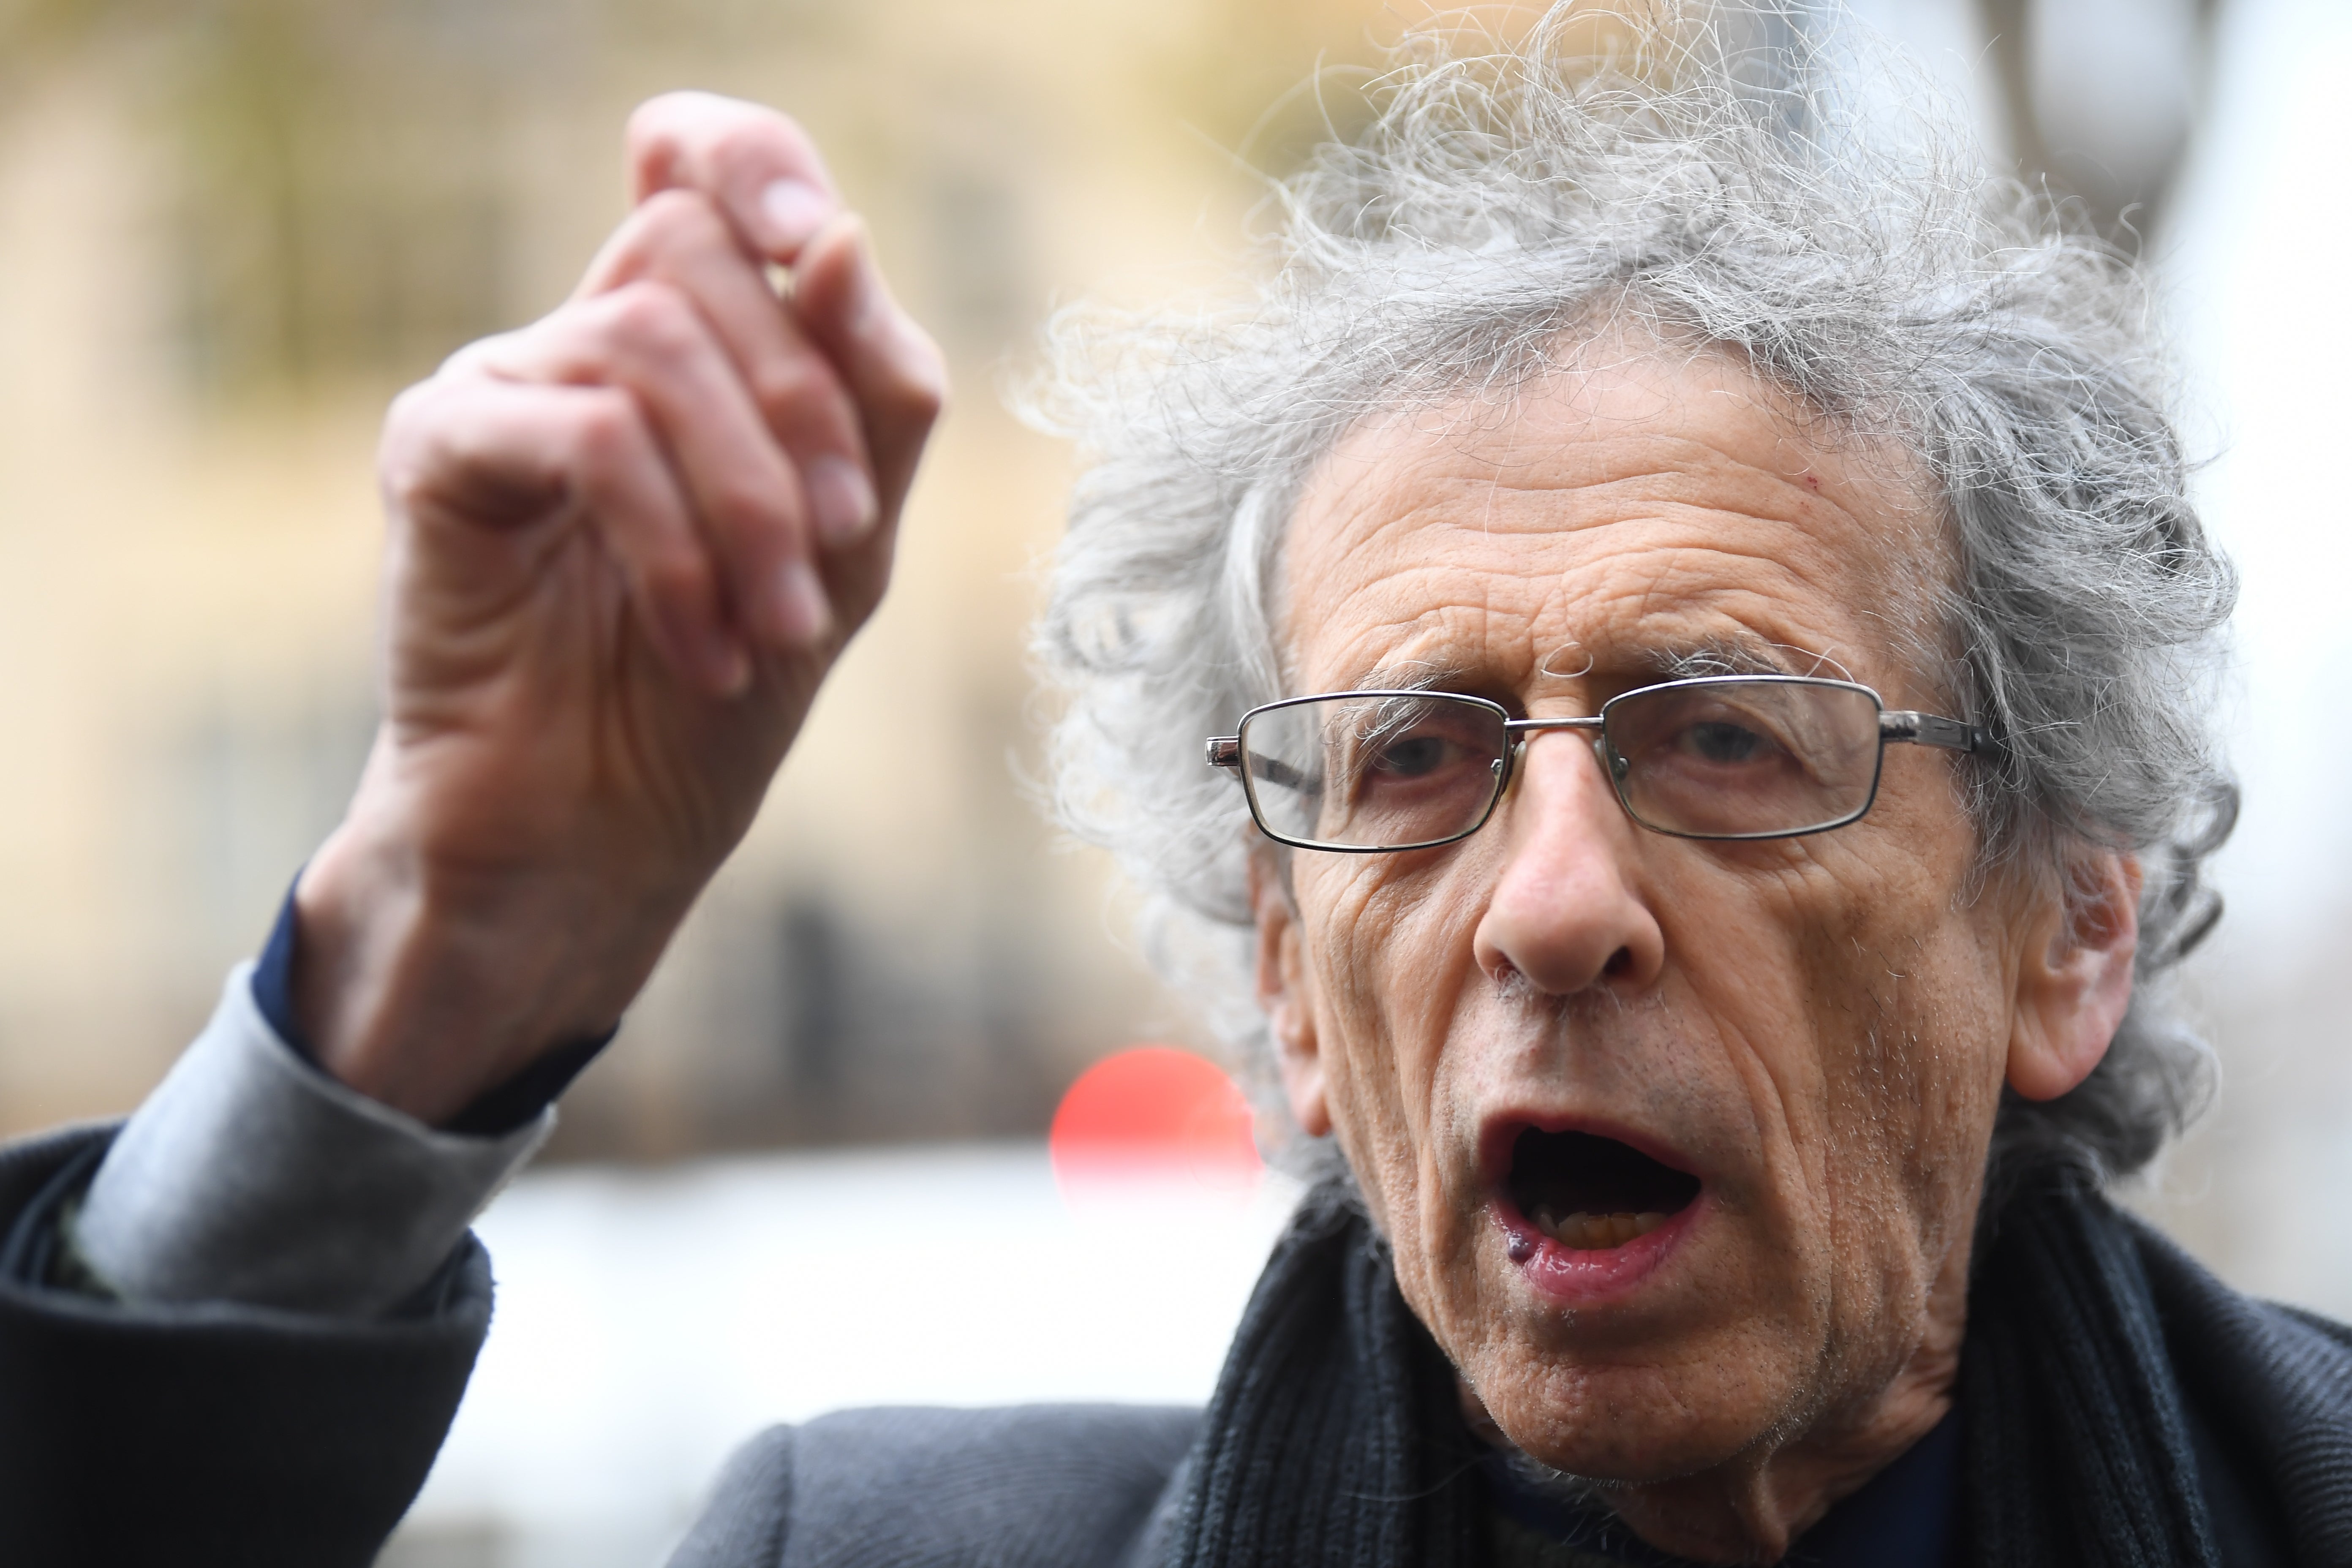 Prominent anti-vaxxer Piers Corbyn referred to the ‘Covid con’ on a podcast made available by the streaming giants